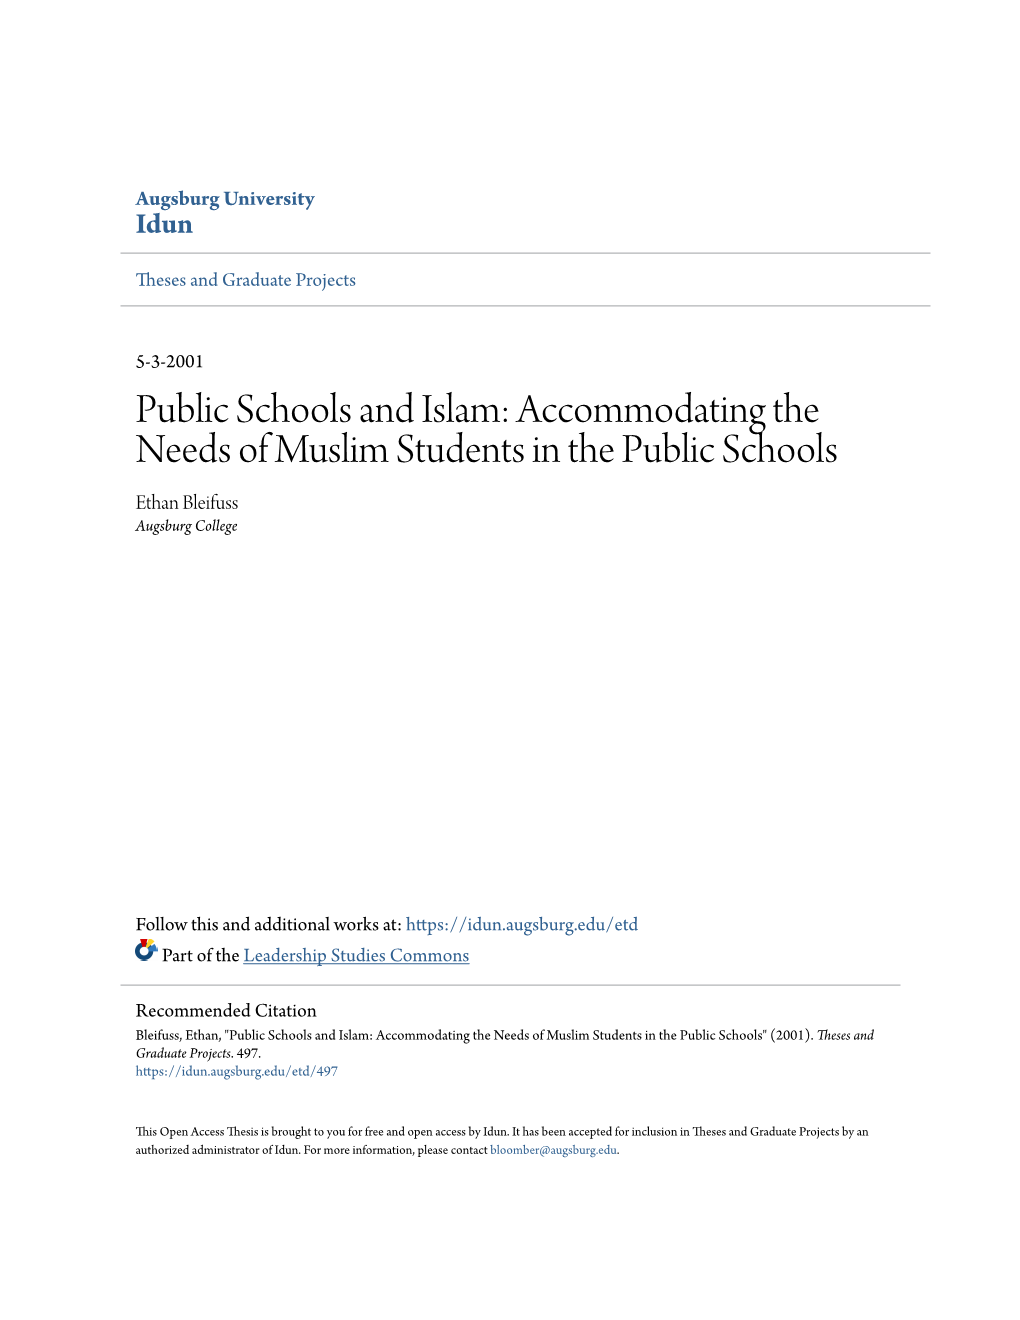 Public Schools and Islam: Accommodating the Needs of Muslim Students in the Public Schools Ethan Bleifuss Augsburg College